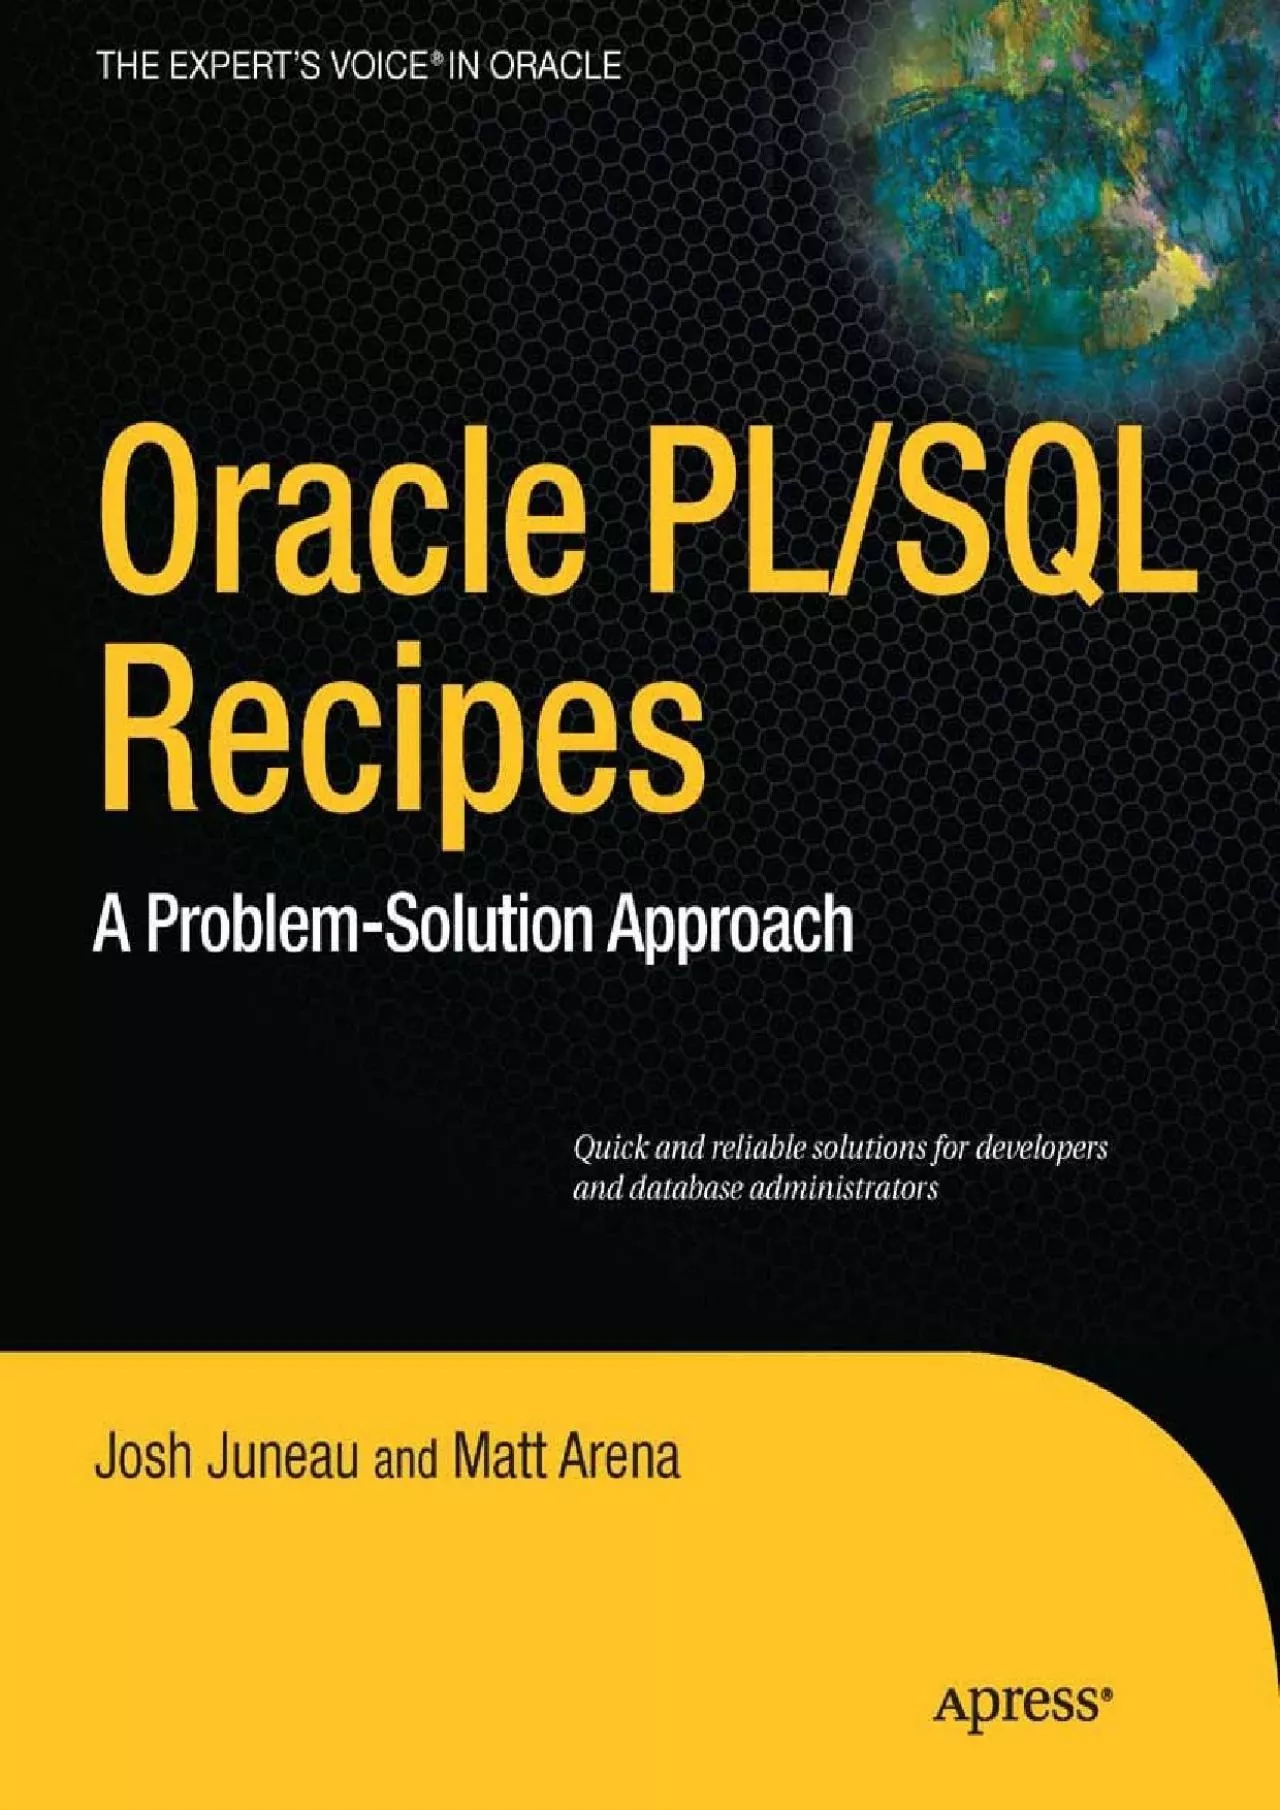 [FREE]-Oracle and PL/SQL Recipes: A Problem-Solution Approach (Expert\'s Voice in Oracle)